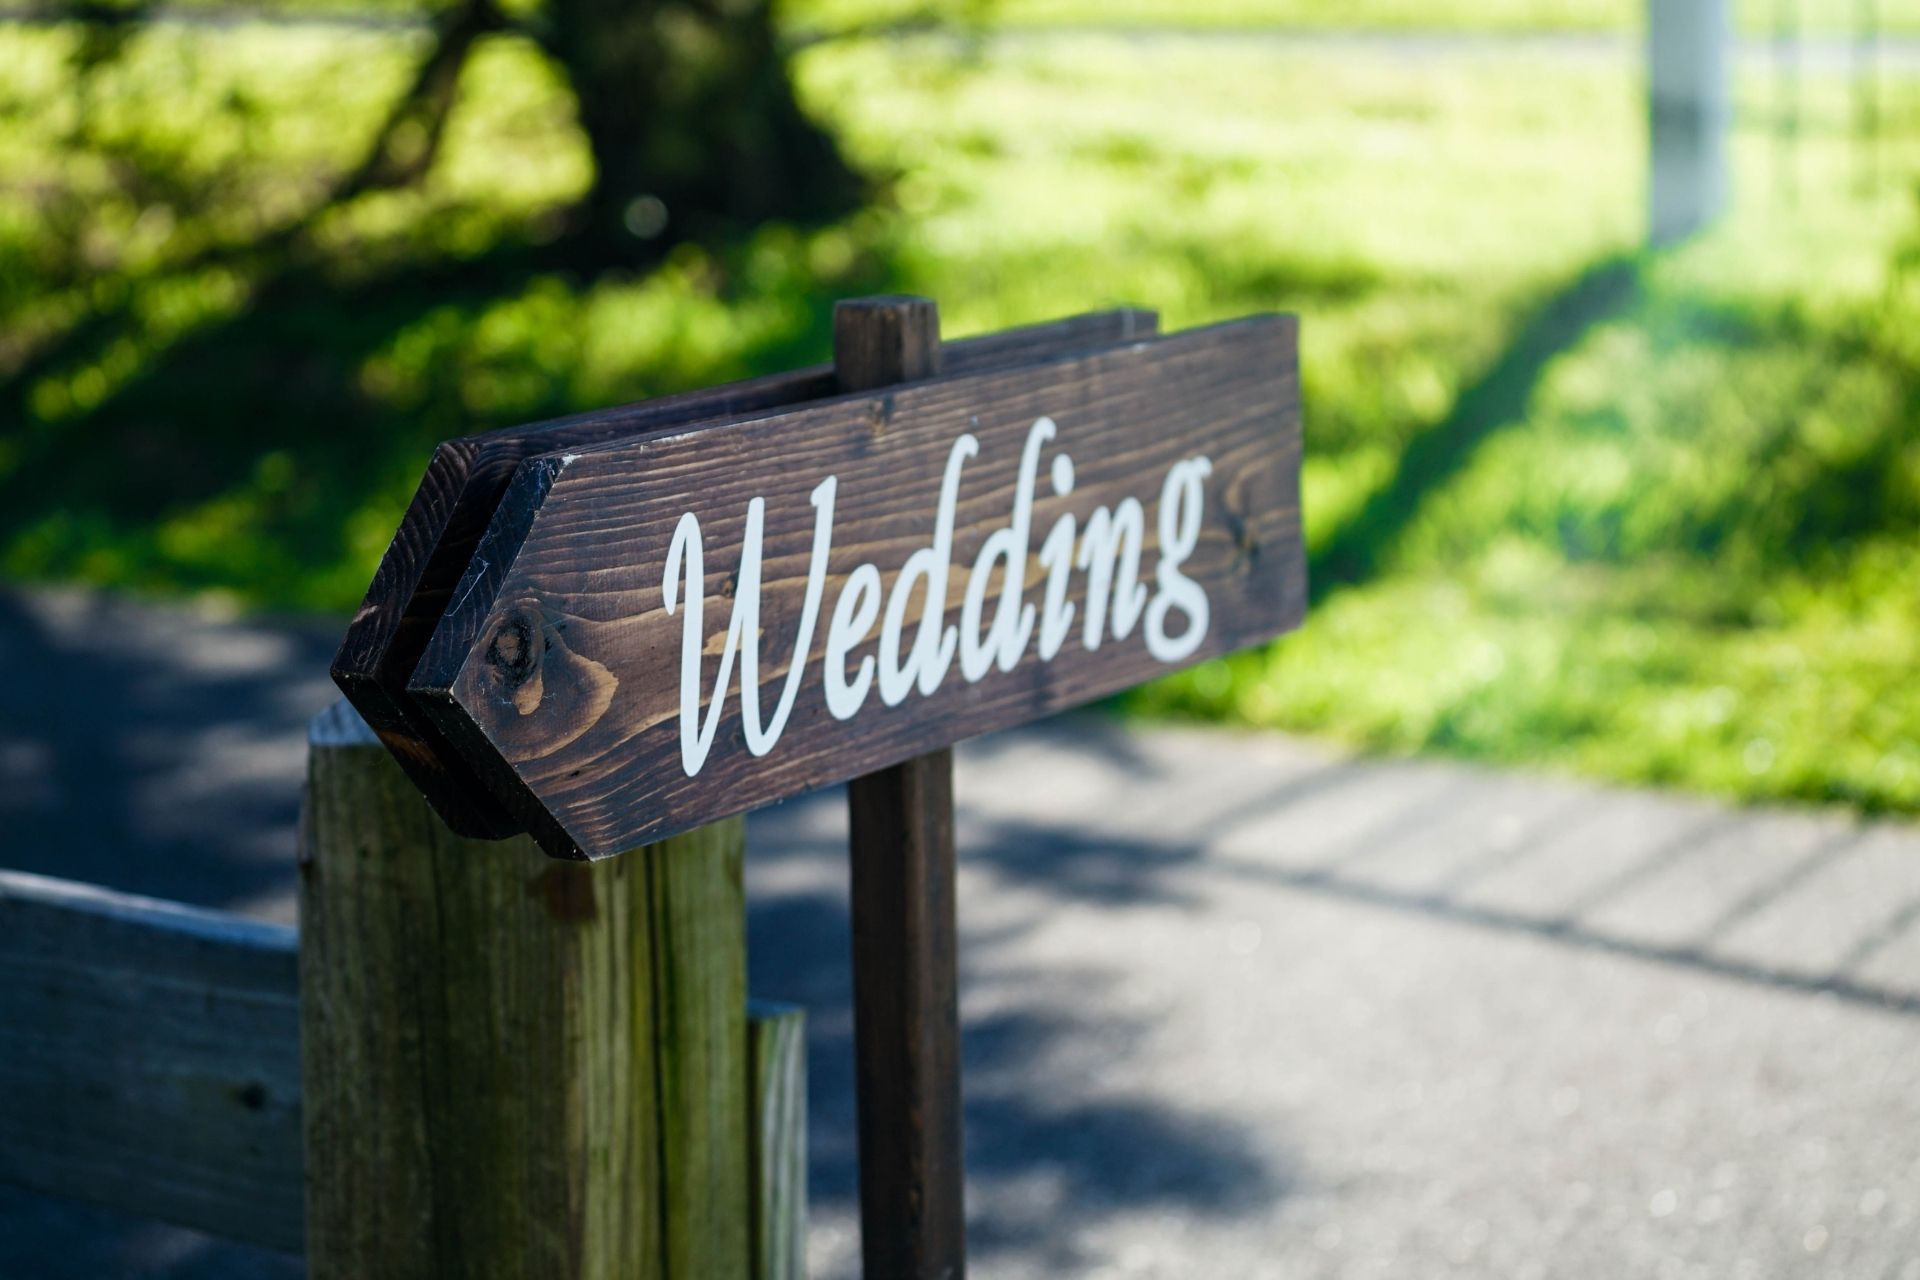 essential-wedding-signposts-for-your-big-day.jpg